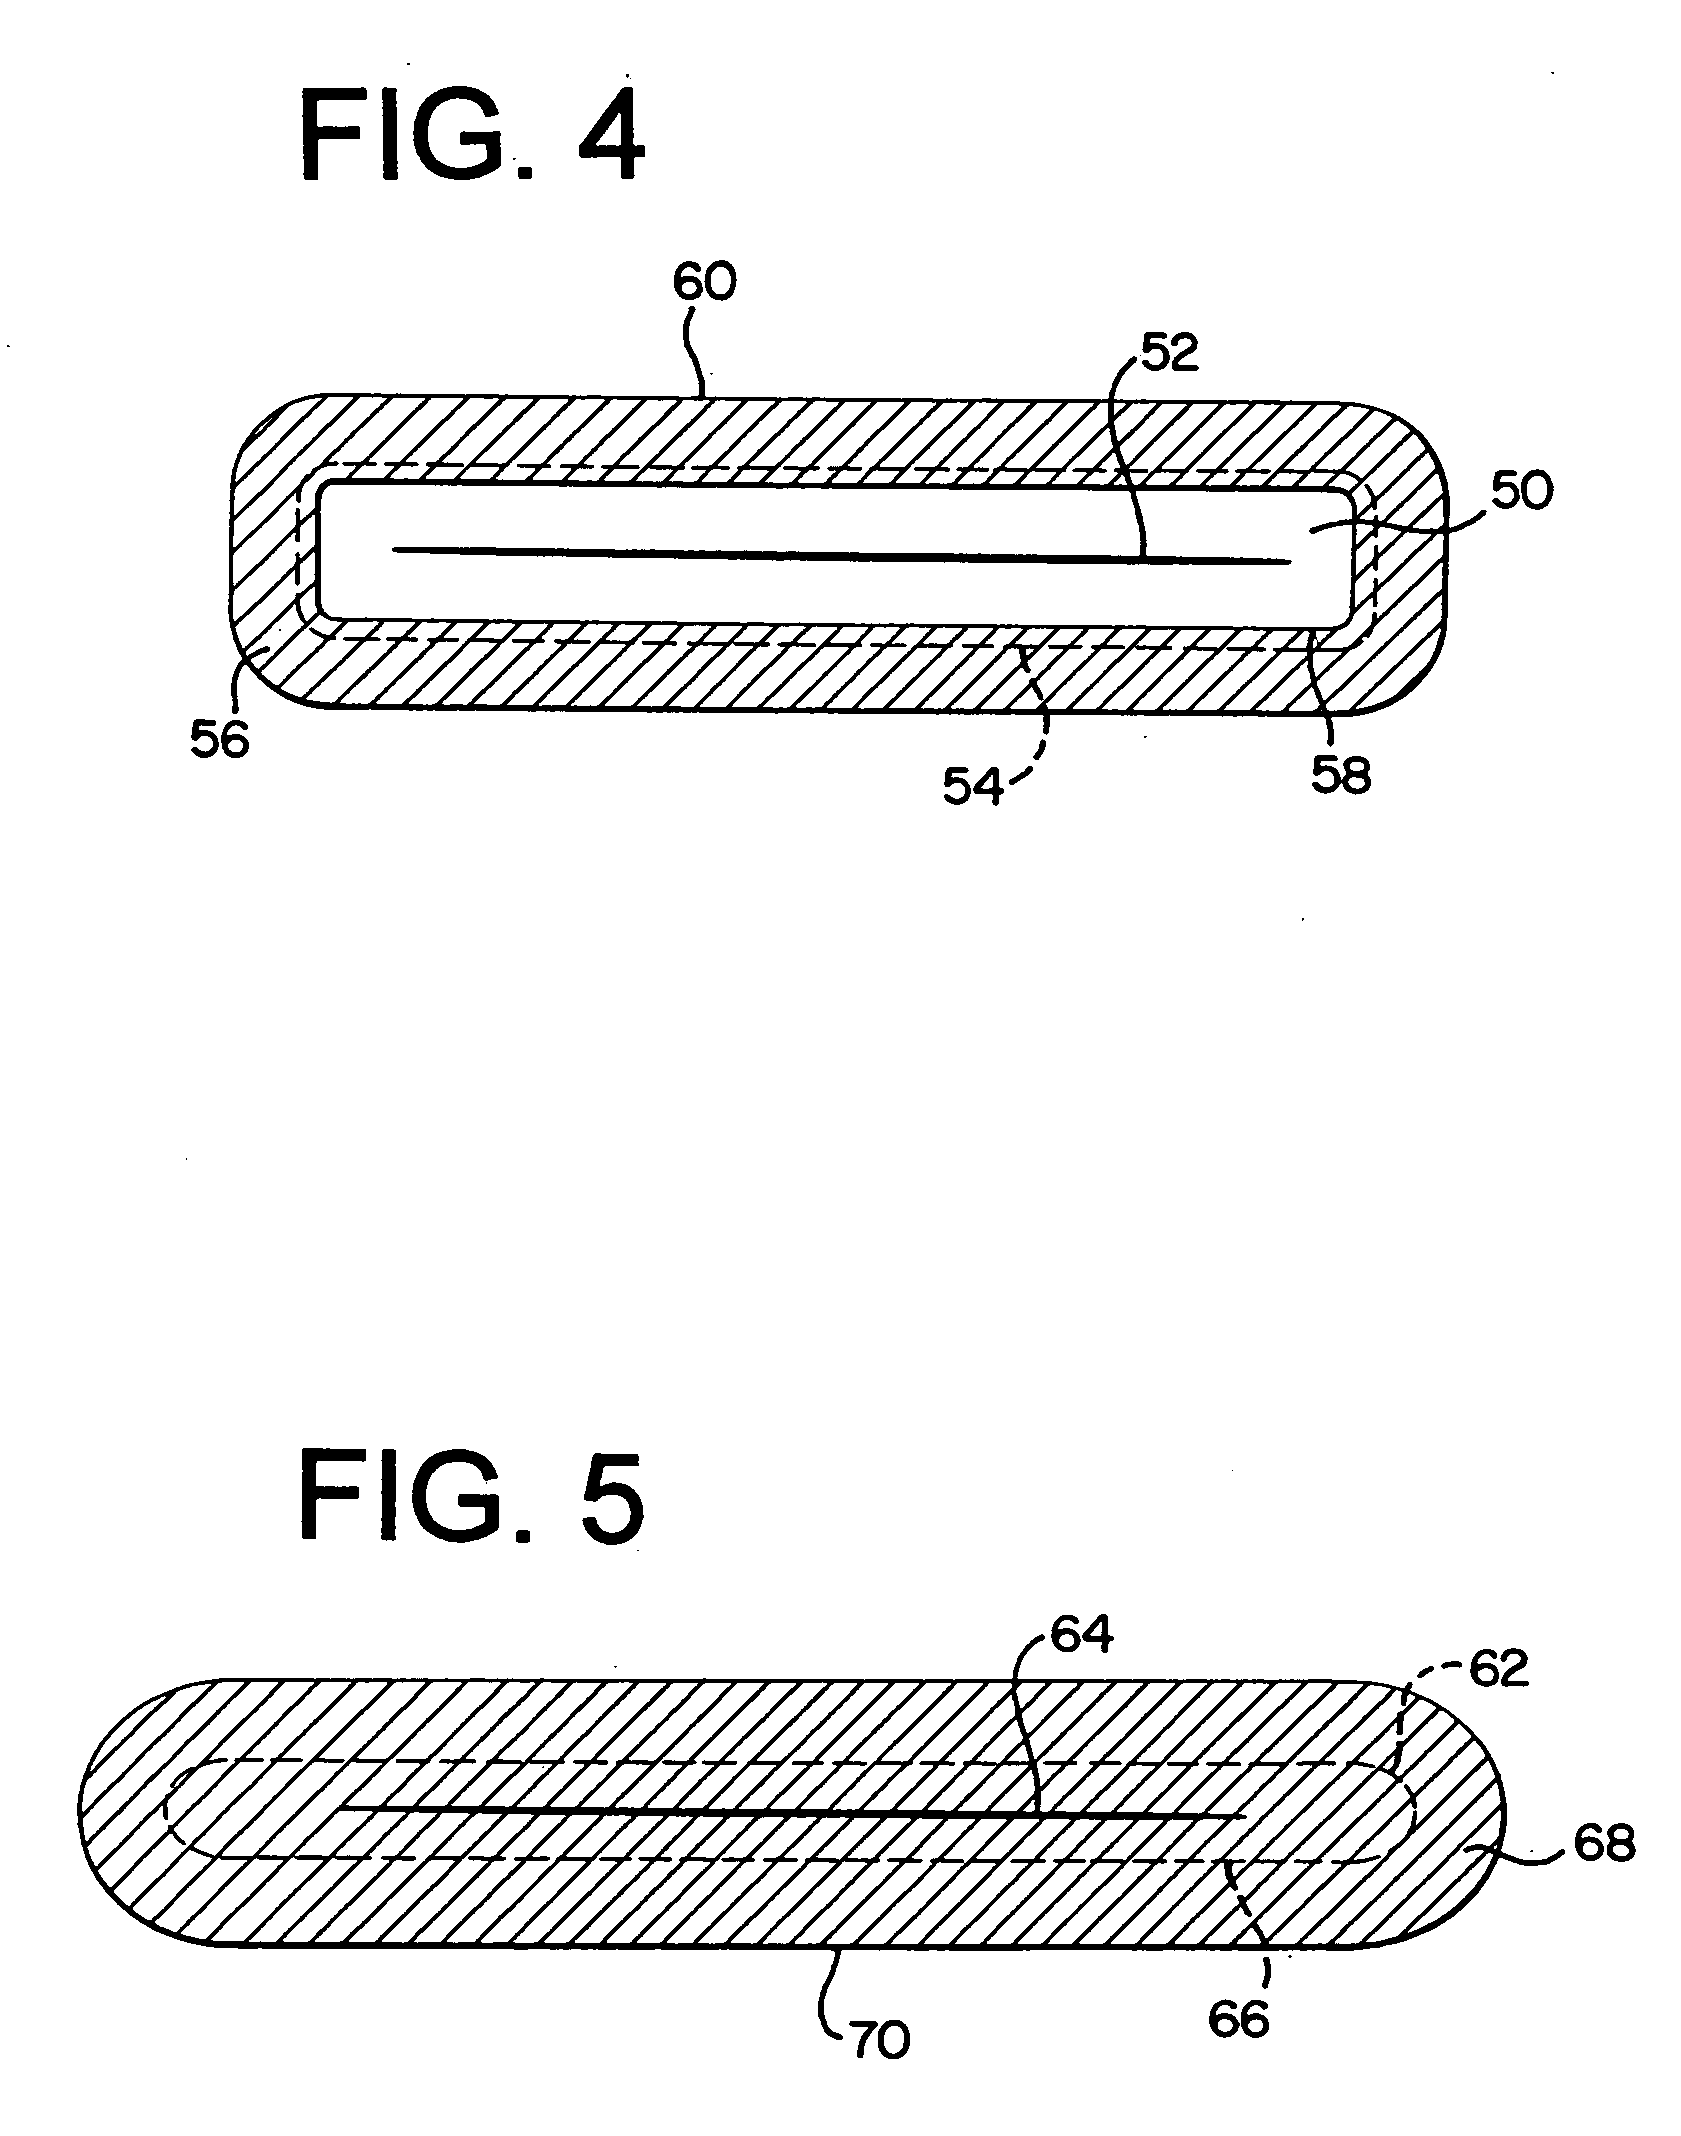 Dressing and method of treatment for a wound